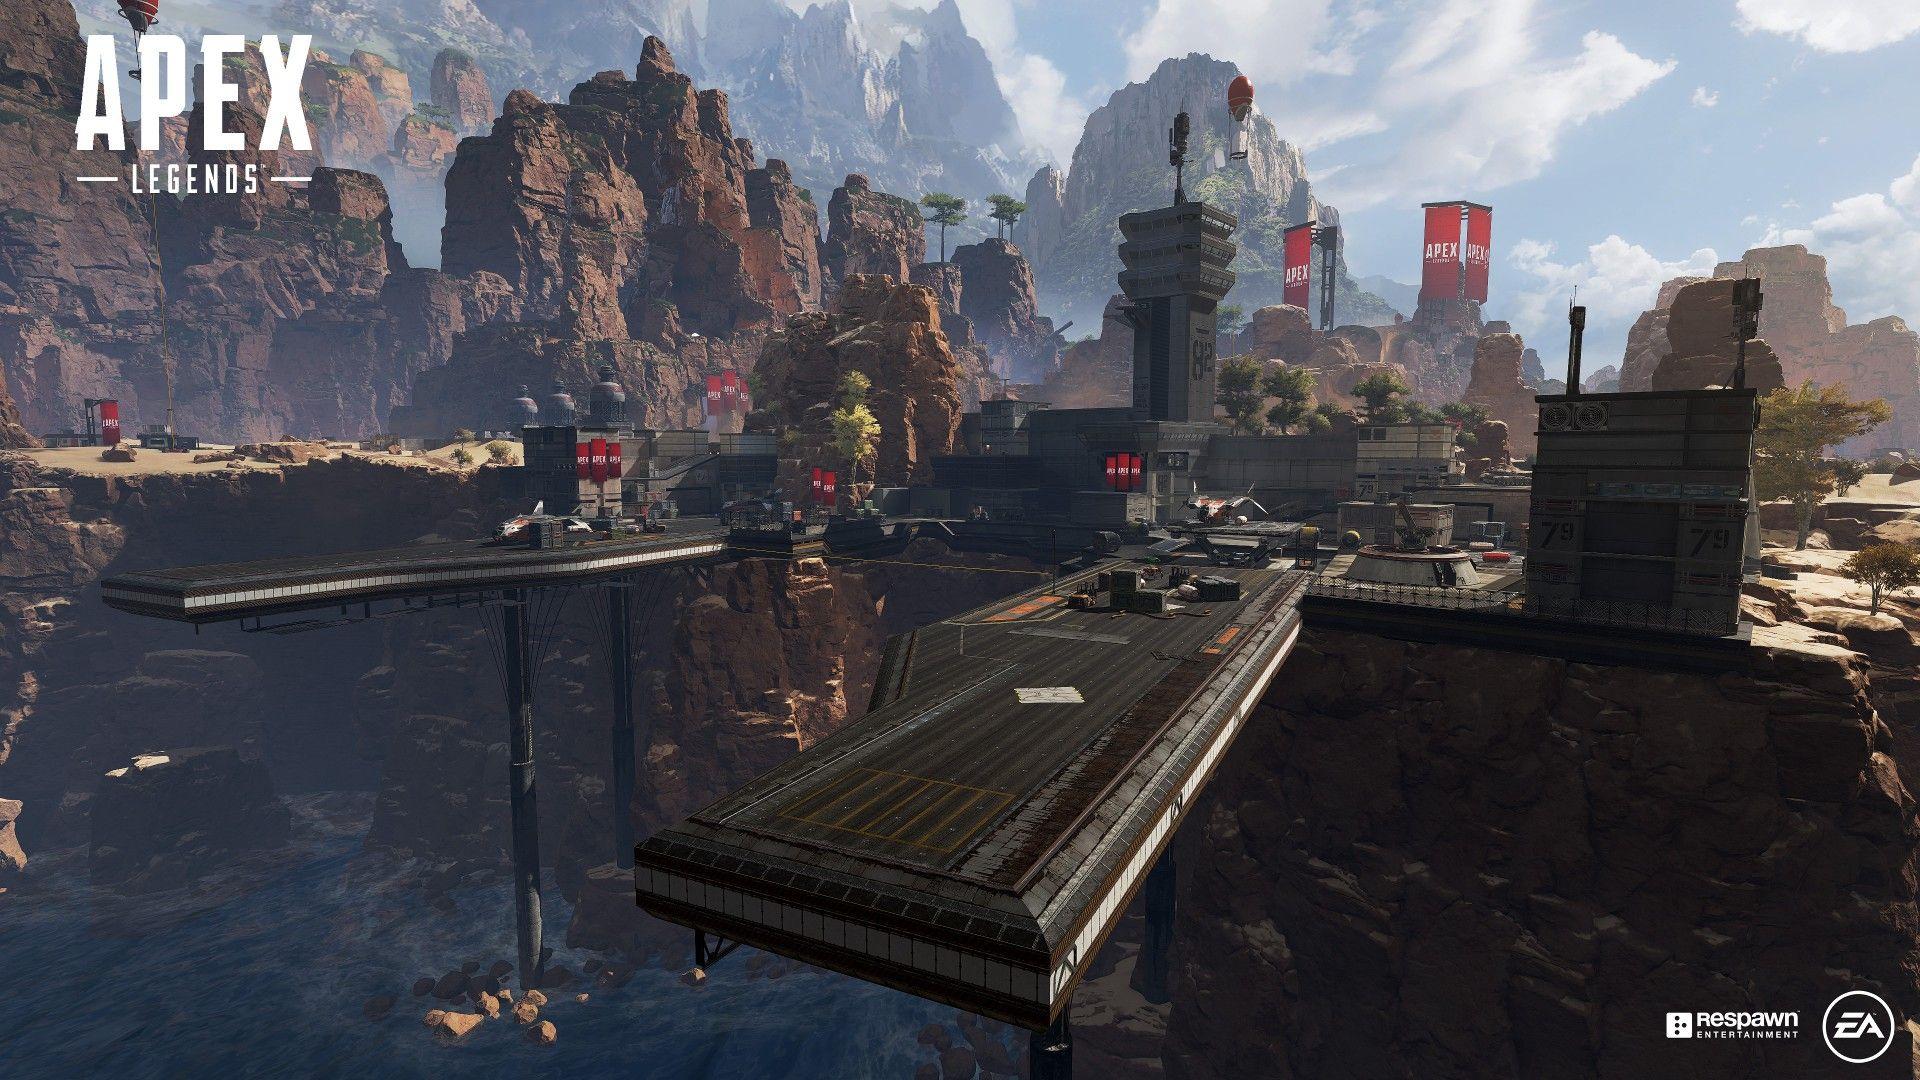 Apex Legends hits another huge player milestone